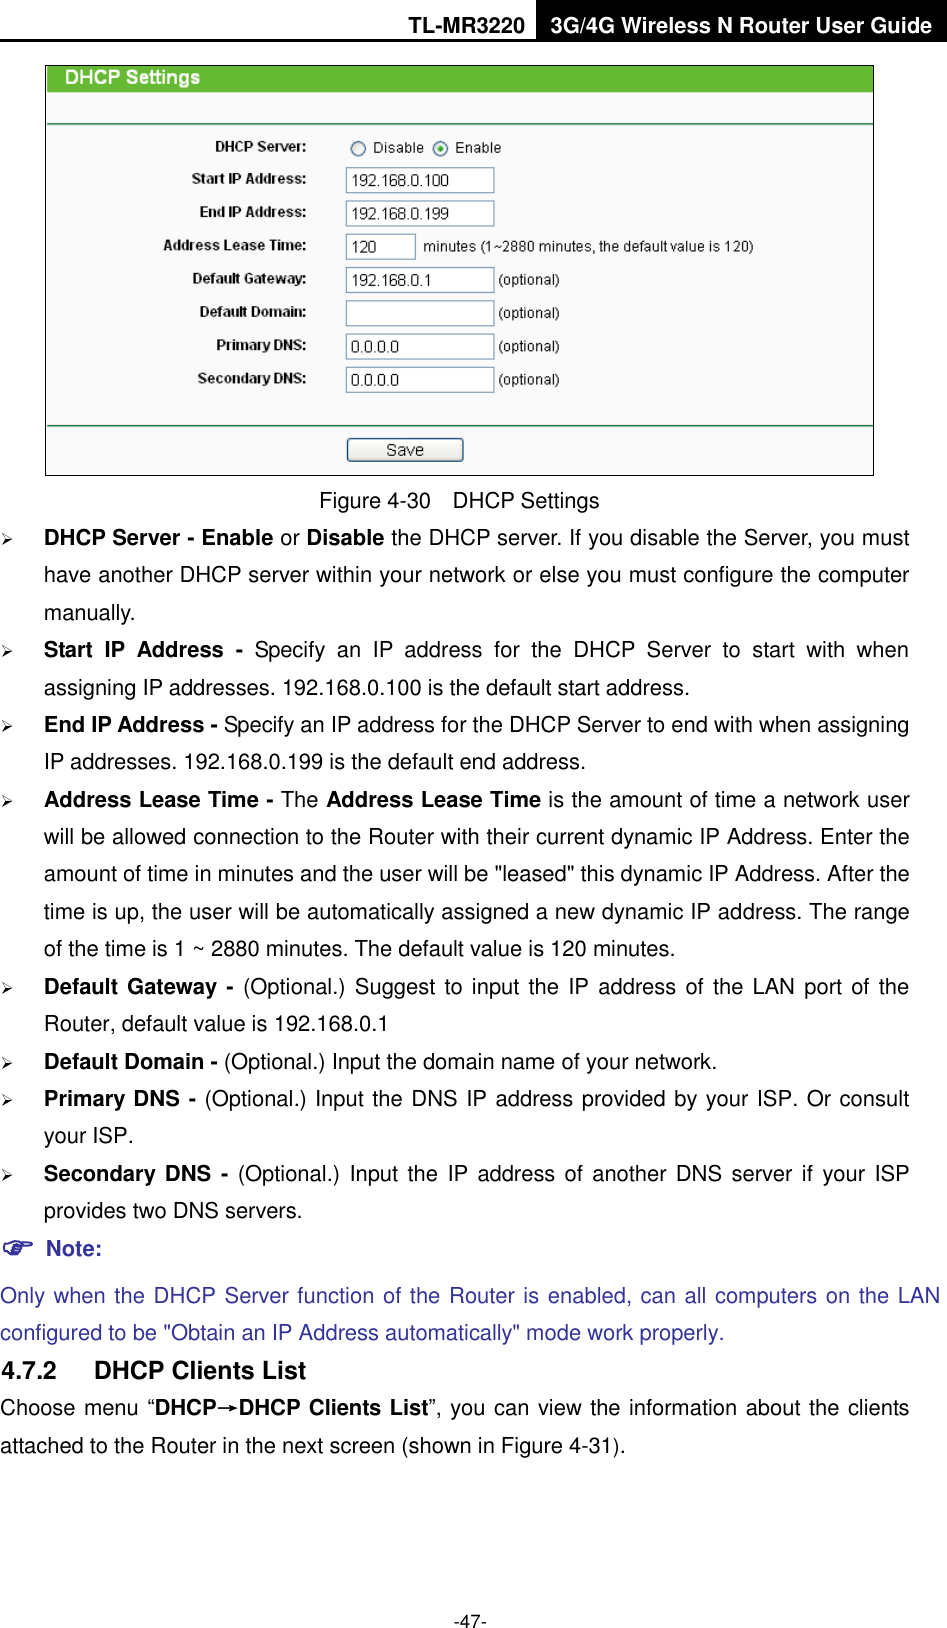 TL-MR3220 3G/4G Wireless N Router User Guide  -47-  Figure 4-30    DHCP Settings  DHCP Server - Enable or Disable the DHCP server. If you disable the Server, you must have another DHCP server within your network or else you must configure the computer manually.  Start  IP  Address  -  Specify  an  IP  address  for  the  DHCP  Server  to  start  with  when assigning IP addresses. 192.168.0.100 is the default start address.  End IP Address - Specify an IP address for the DHCP Server to end with when assigning IP addresses. 192.168.0.199 is the default end address.  Address Lease Time - The Address Lease Time is the amount of time a network user will be allowed connection to the Router with their current dynamic IP Address. Enter the amount of time in minutes and the user will be &quot;leased&quot; this dynamic IP Address. After the time is up, the user will be automatically assigned a new dynamic IP address. The range of the time is 1 ~ 2880 minutes. The default value is 120 minutes.  Default Gateway - (Optional.) Suggest to input the IP address of the  LAN port of the Router, default value is 192.168.0.1  Default Domain - (Optional.) Input the domain name of your network.  Primary DNS - (Optional.) Input the DNS IP address provided by your ISP. Or consult your ISP.  Secondary  DNS  -  (Optional.) Input  the  IP address  of  another DNS  server if  your ISP provides two DNS servers.  Note: Only when the DHCP Server function of the Router is enabled, can all computers on the LAN configured to be &quot;Obtain an IP Address automatically&quot; mode work properly. 4.7.2  DHCP Clients List Choose menu “DHCP→DHCP Clients List”, you can view the information about the clients attached to the Router in the next screen (shown in Figure 4-31). 